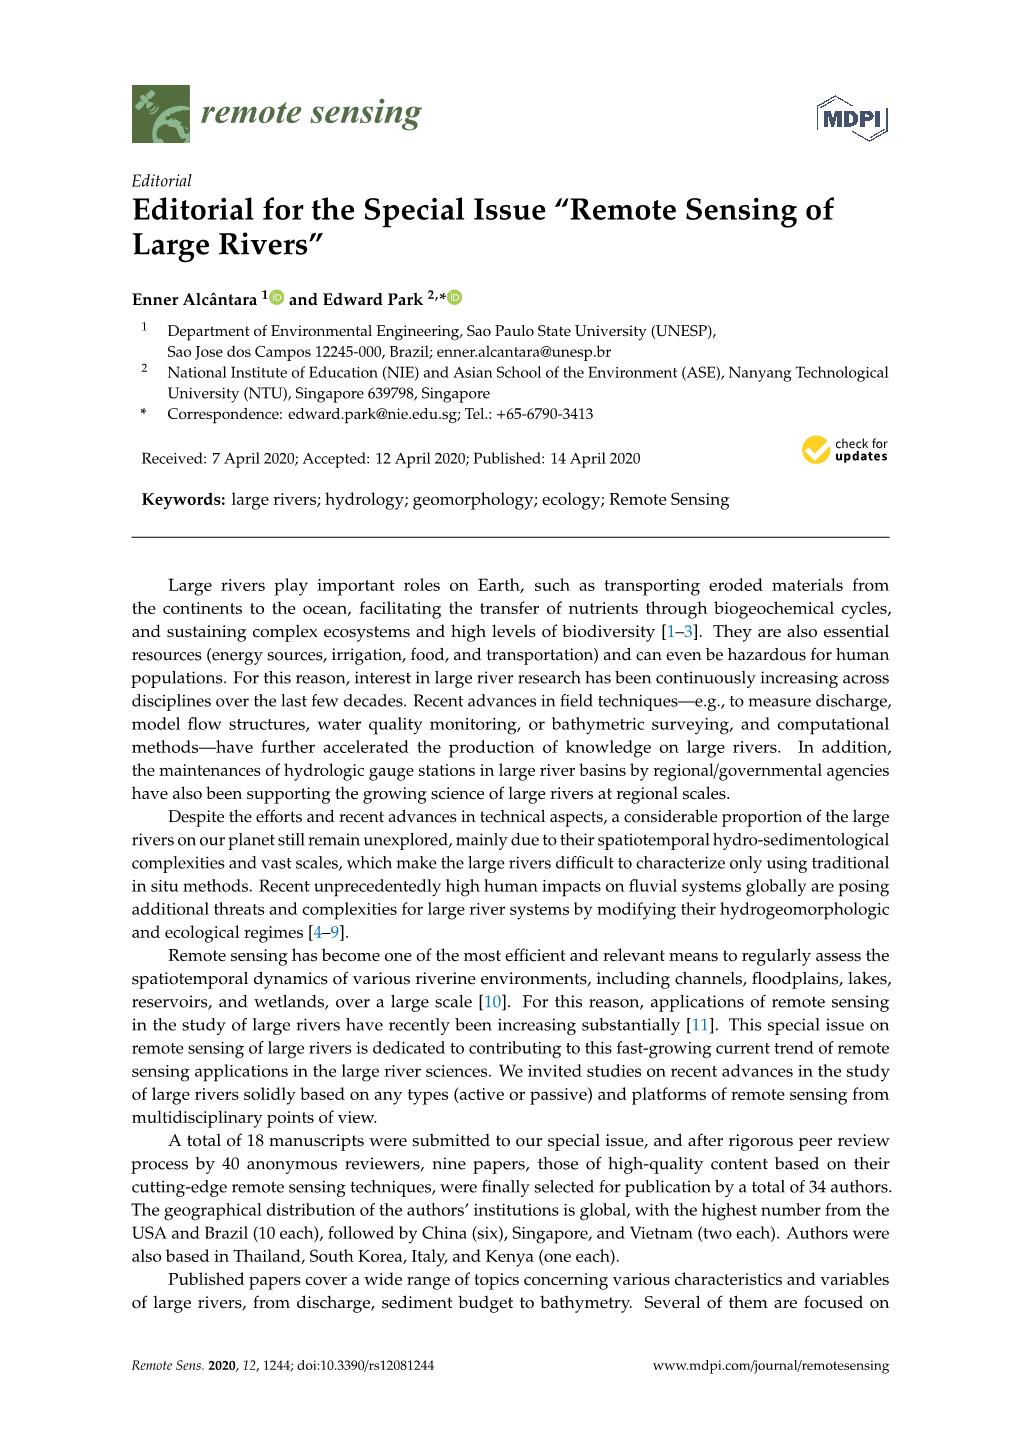 Editorial for the Special Issue “Remote Sensing of Large Rivers”